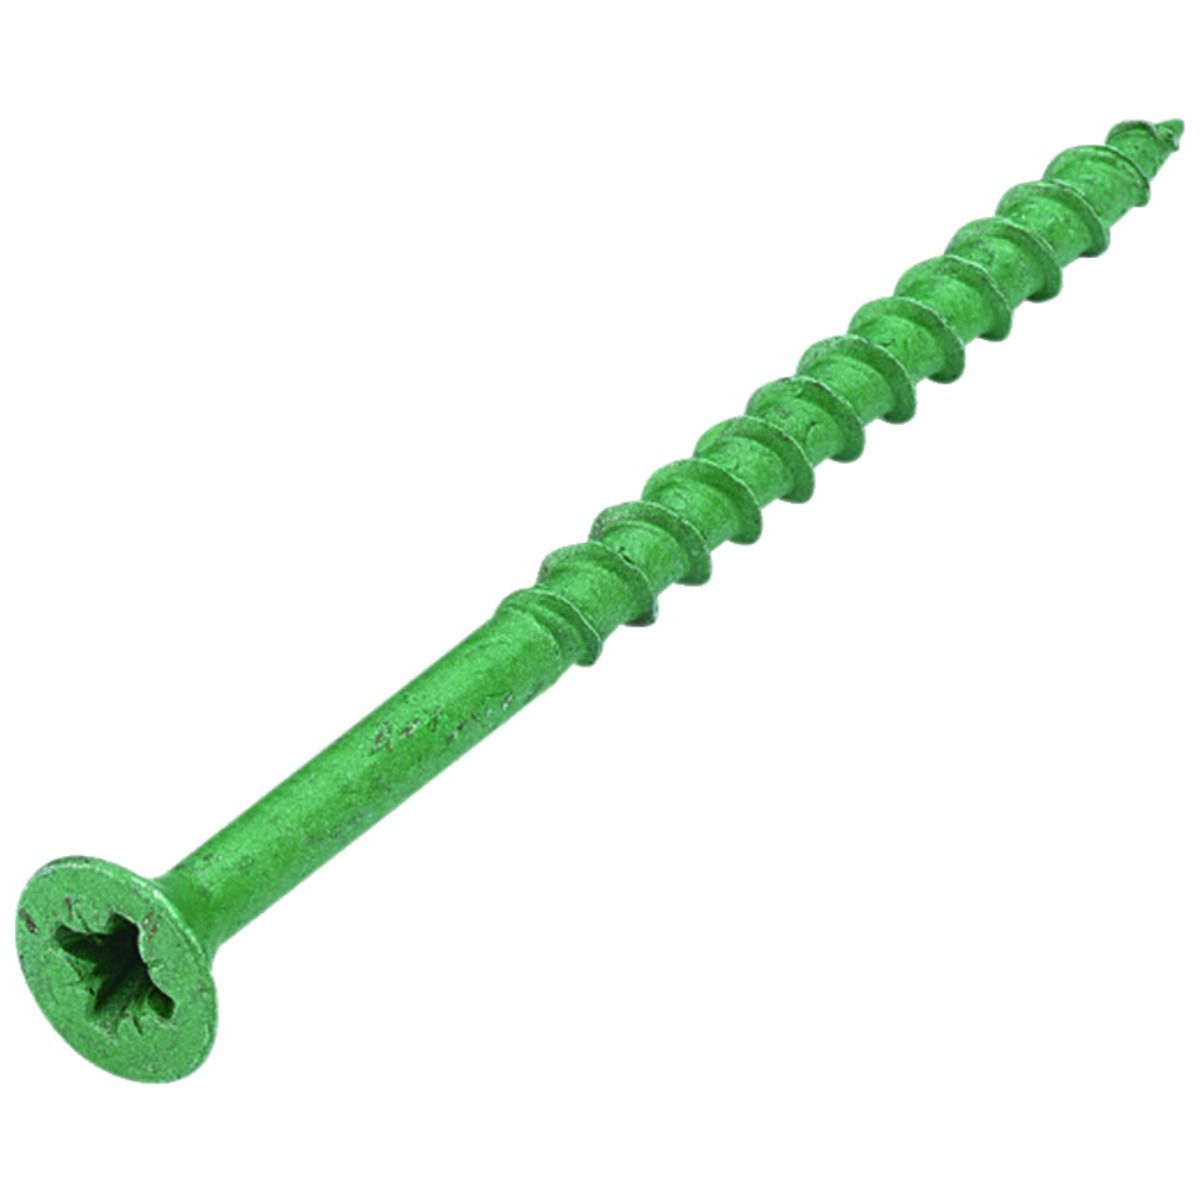 Image of Wickes External Grade Screws - Green No 10 x 76mm Pack of 250